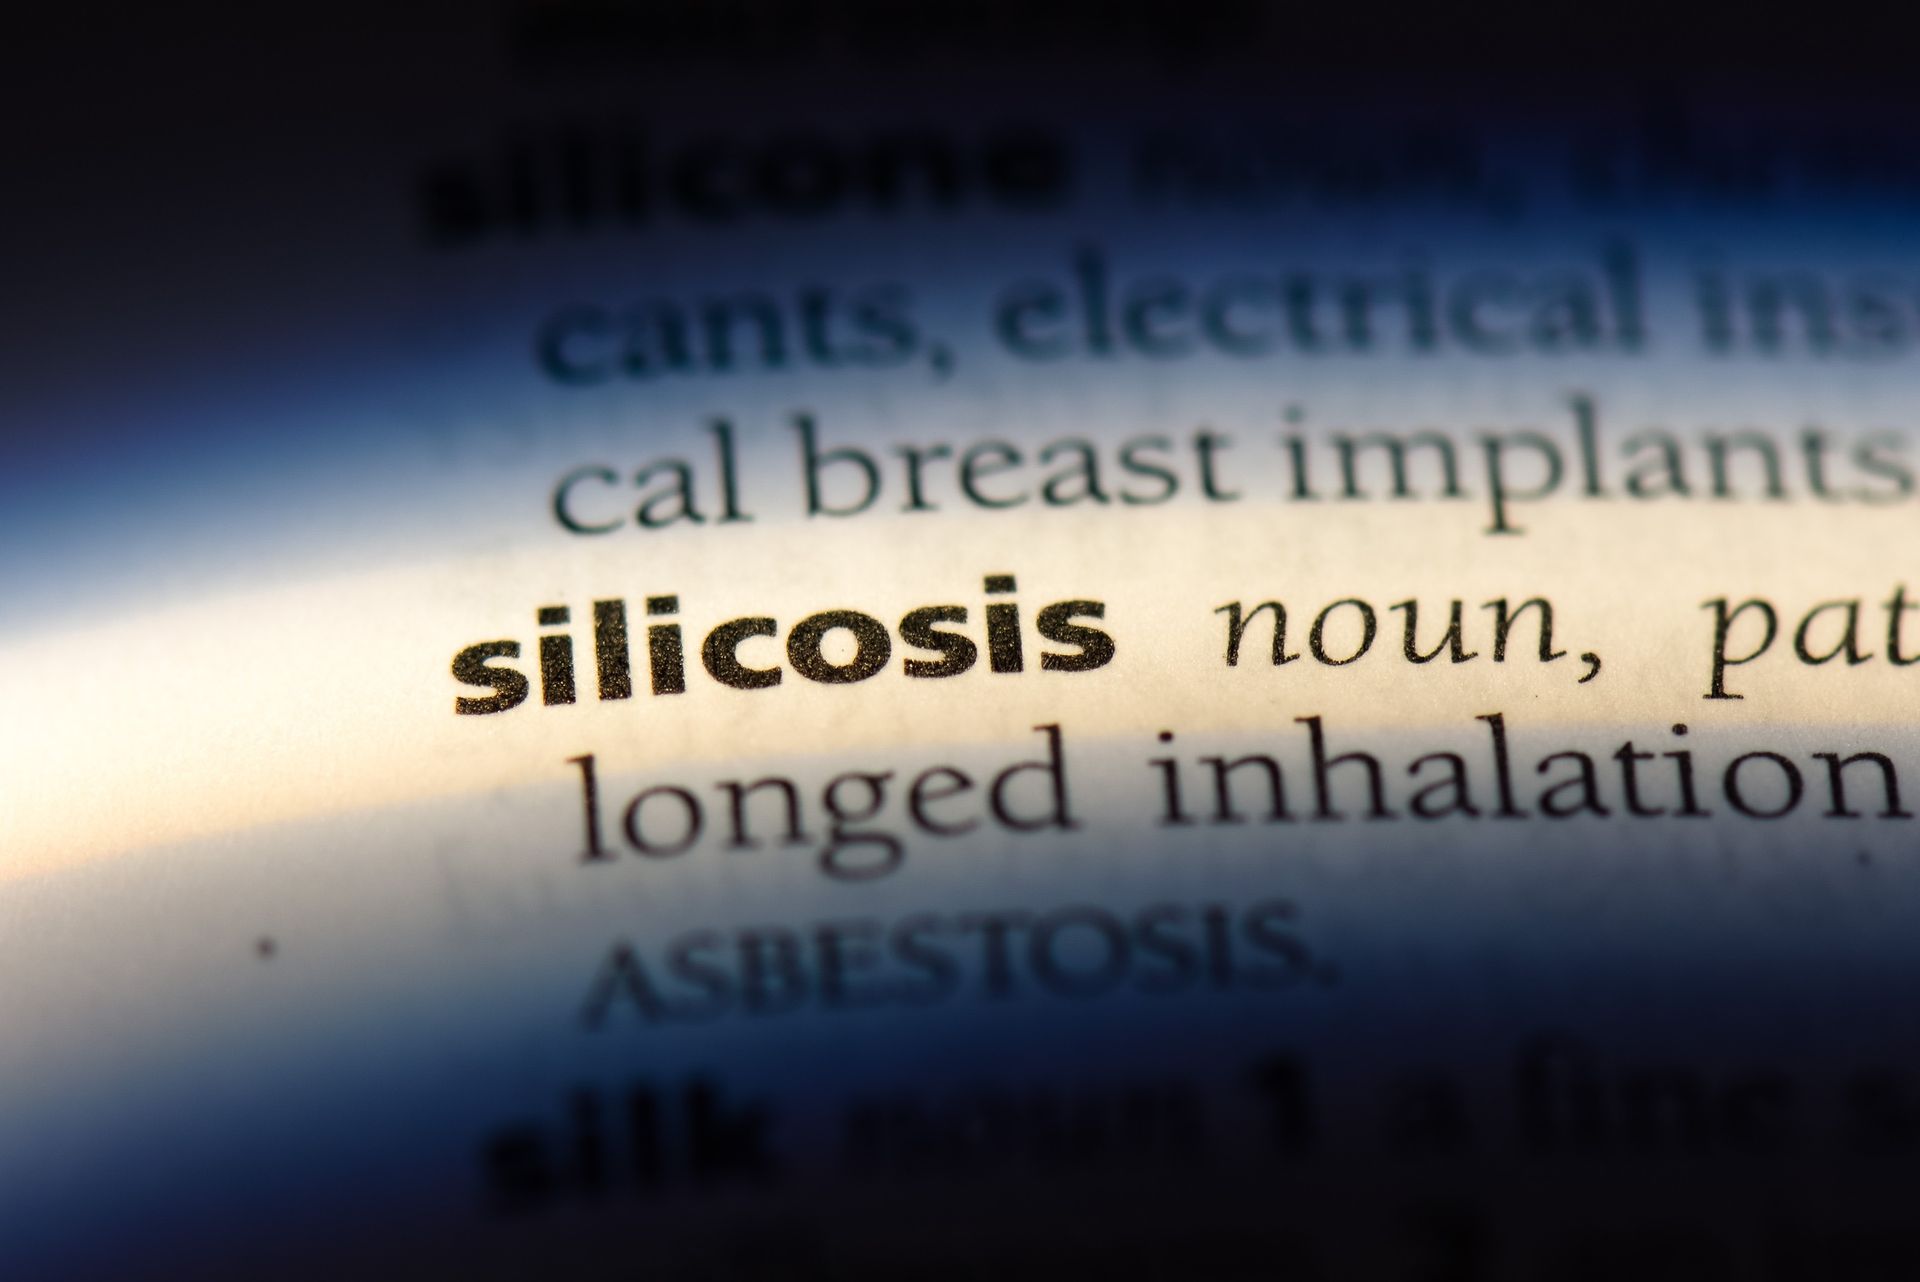 silicosis definition in dictionary